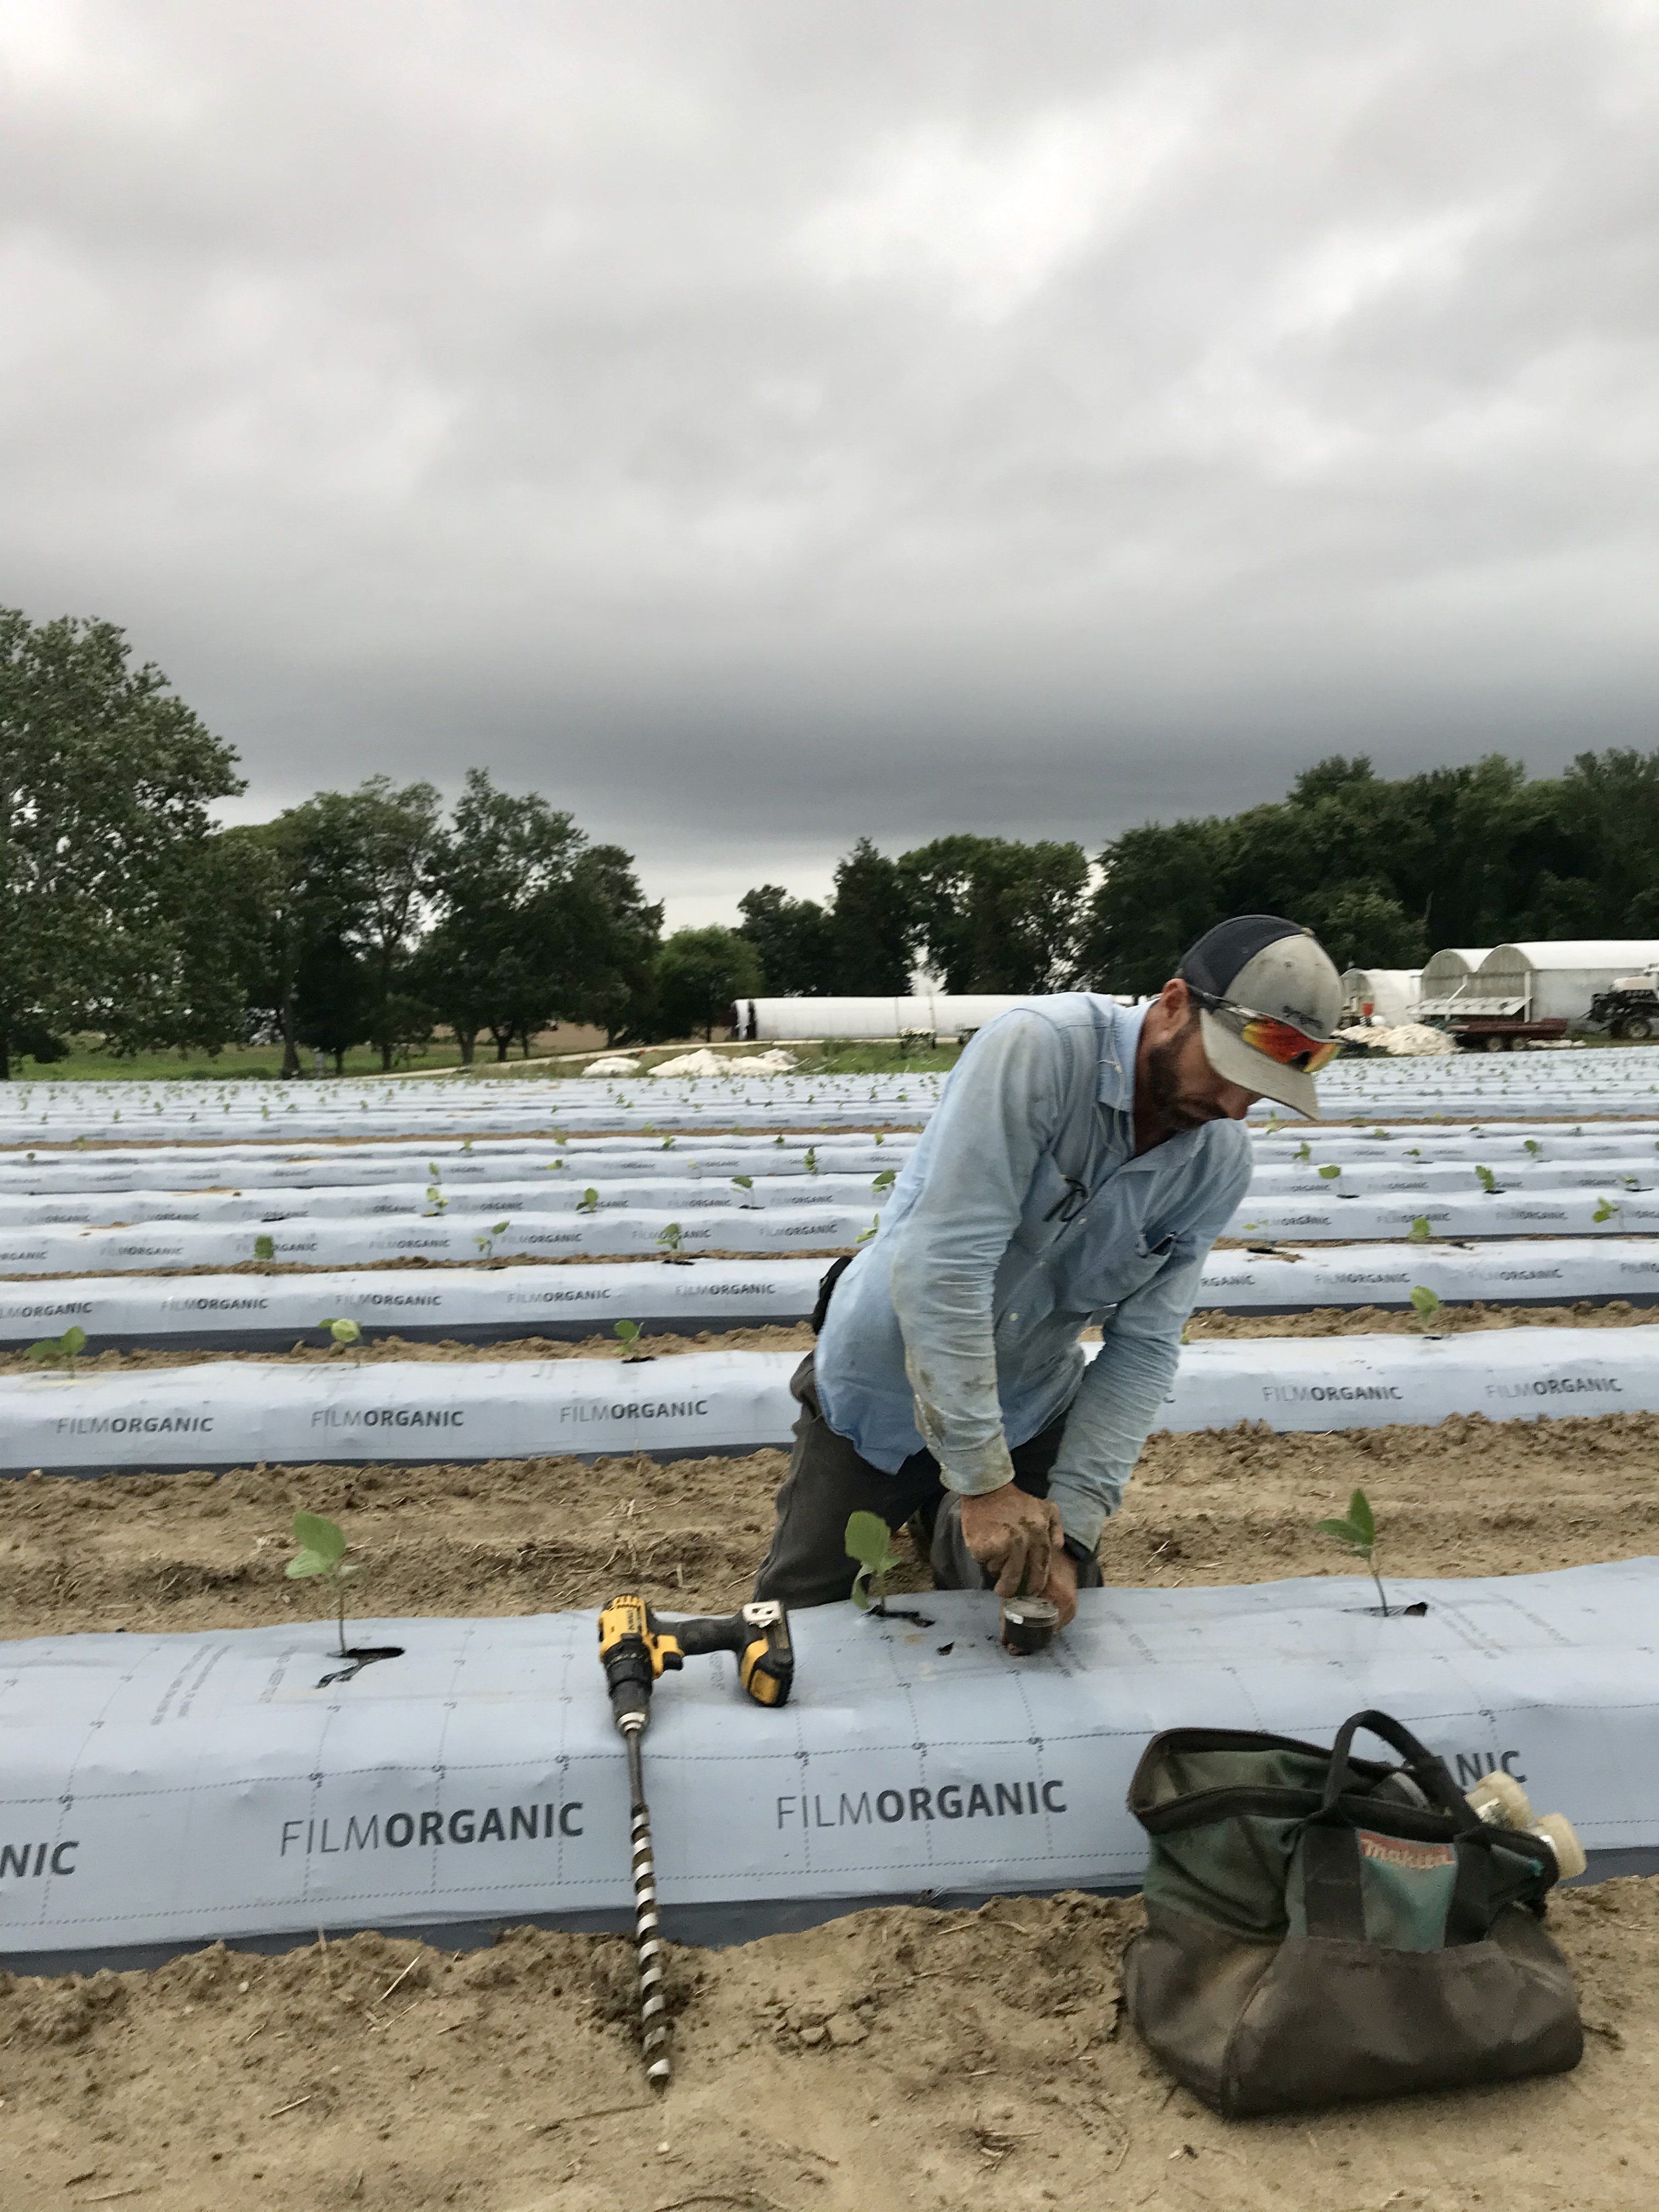 Previous Happening: Farm Happenings for July 13, 2020